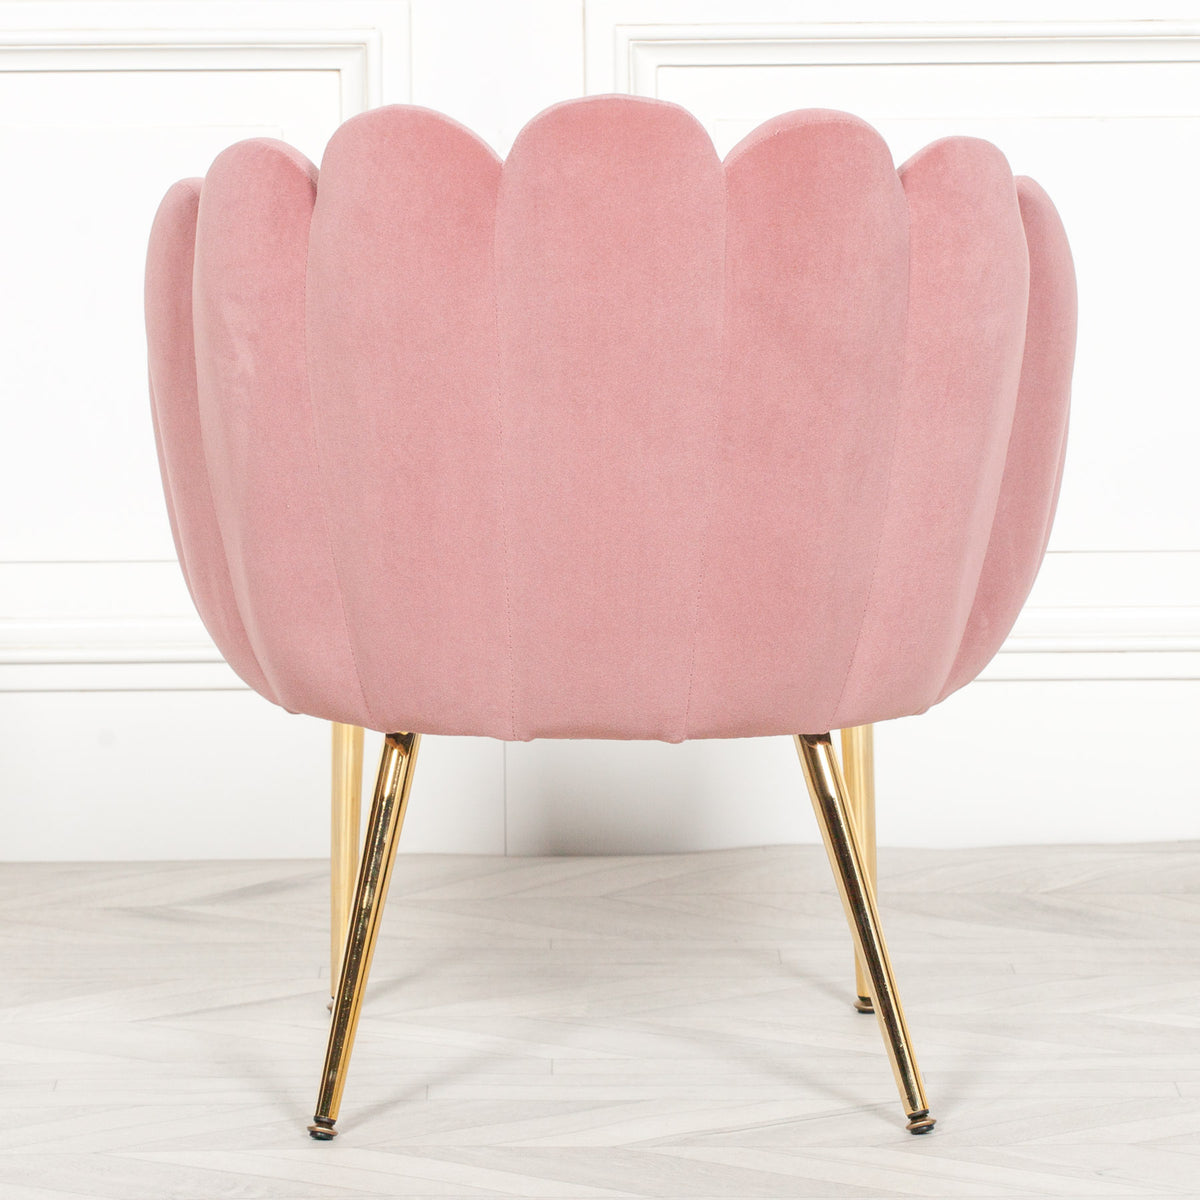 Scalloped chair pink cocktail chair oyster chair shell chair pink velvet scallop chair  furniture stores uk armchairs for sale armchairs uk armchair uk